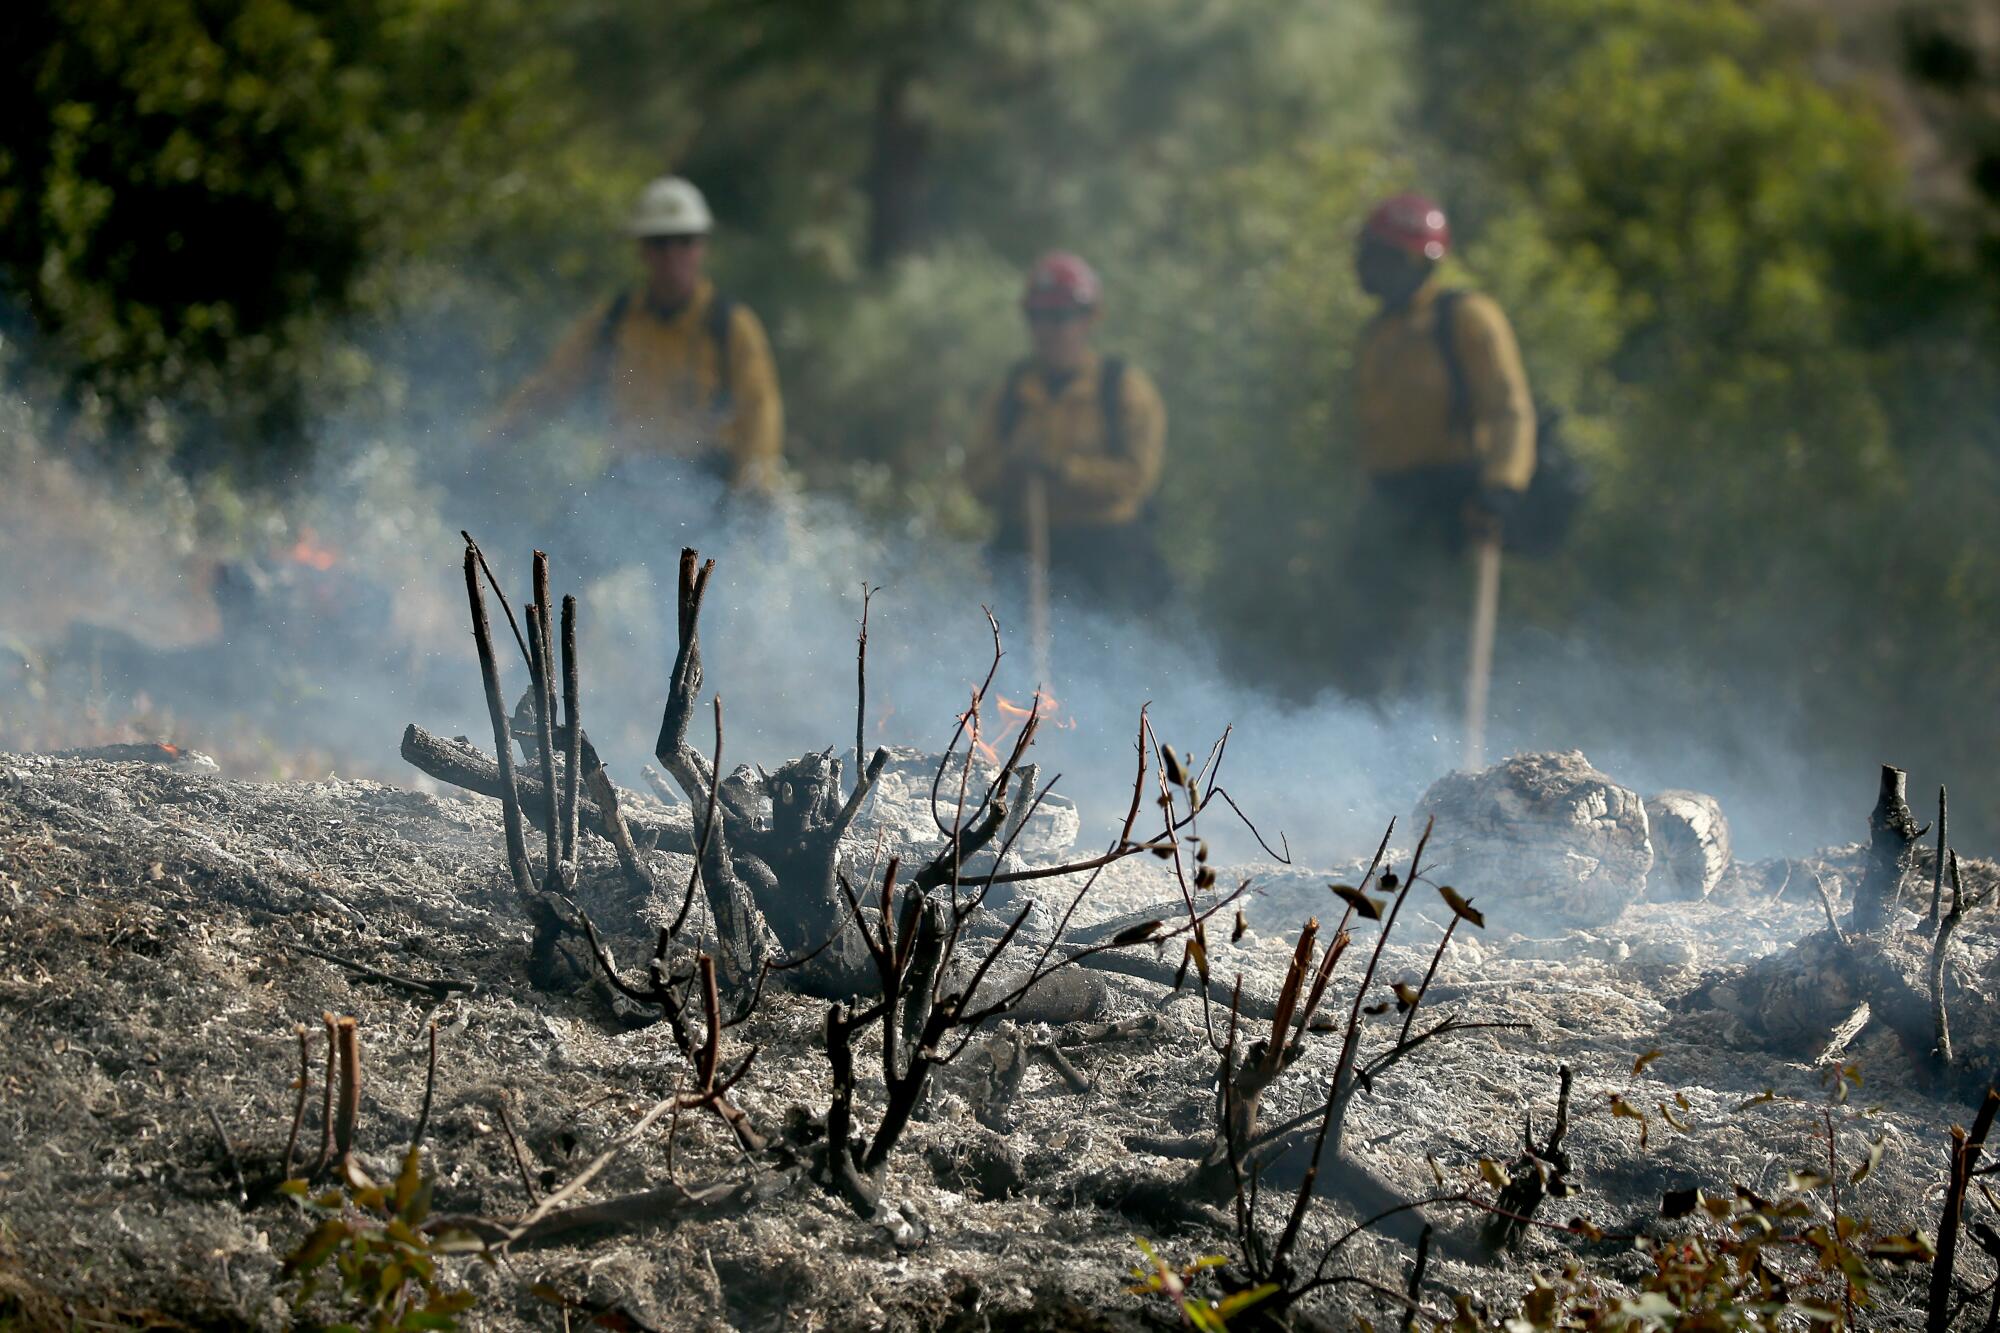 Firefighters stand behind the smoking remnants of a controlled burn.